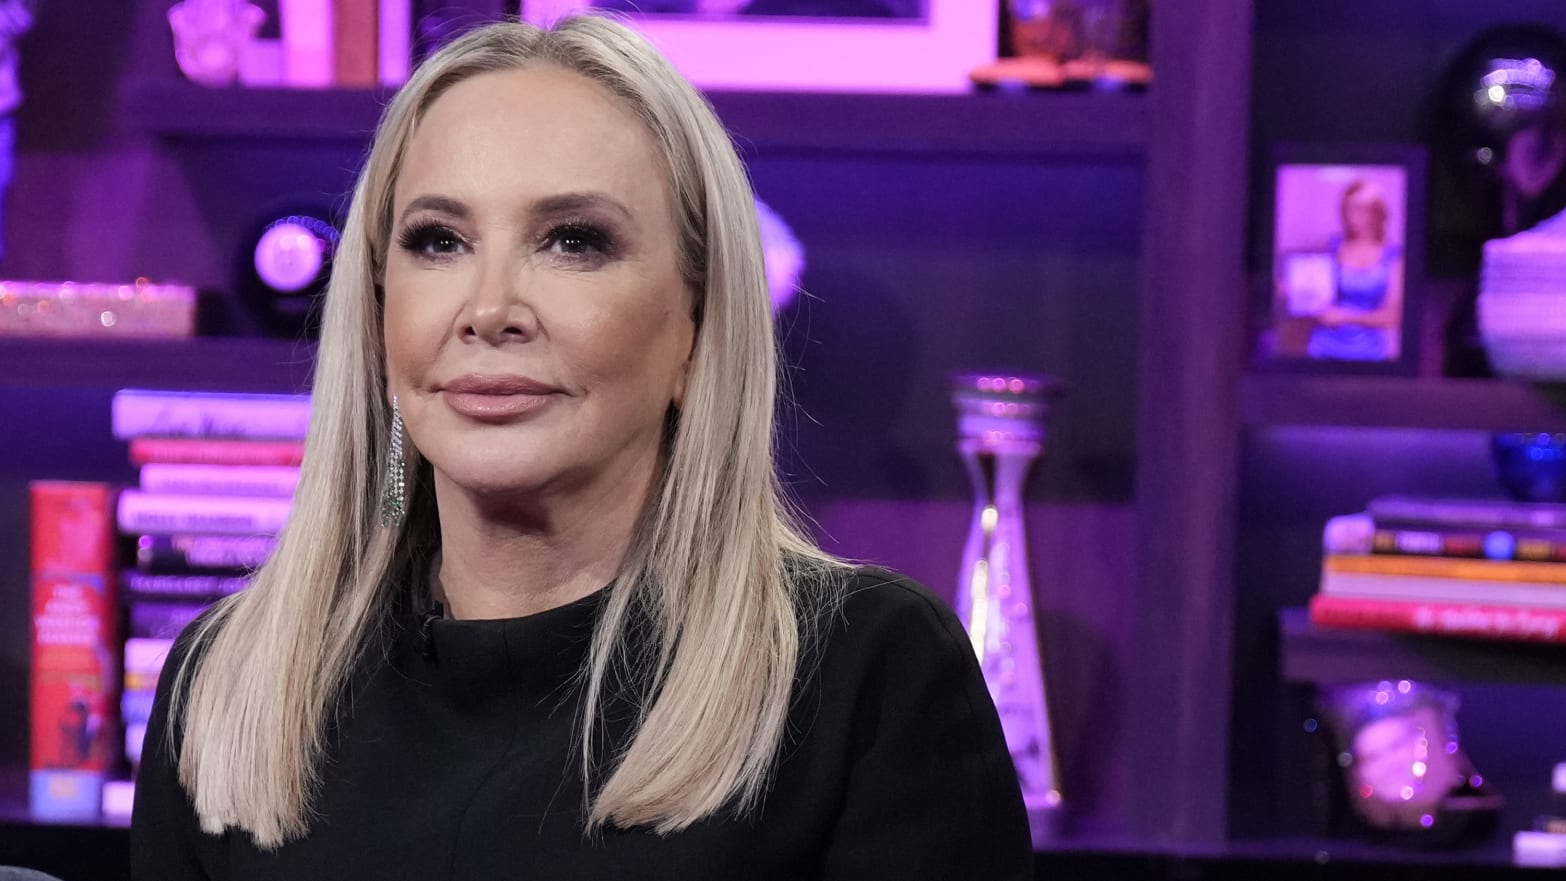 Real Housewives Star Shannon Beador Arrested for DUI, Hit-And-Run image